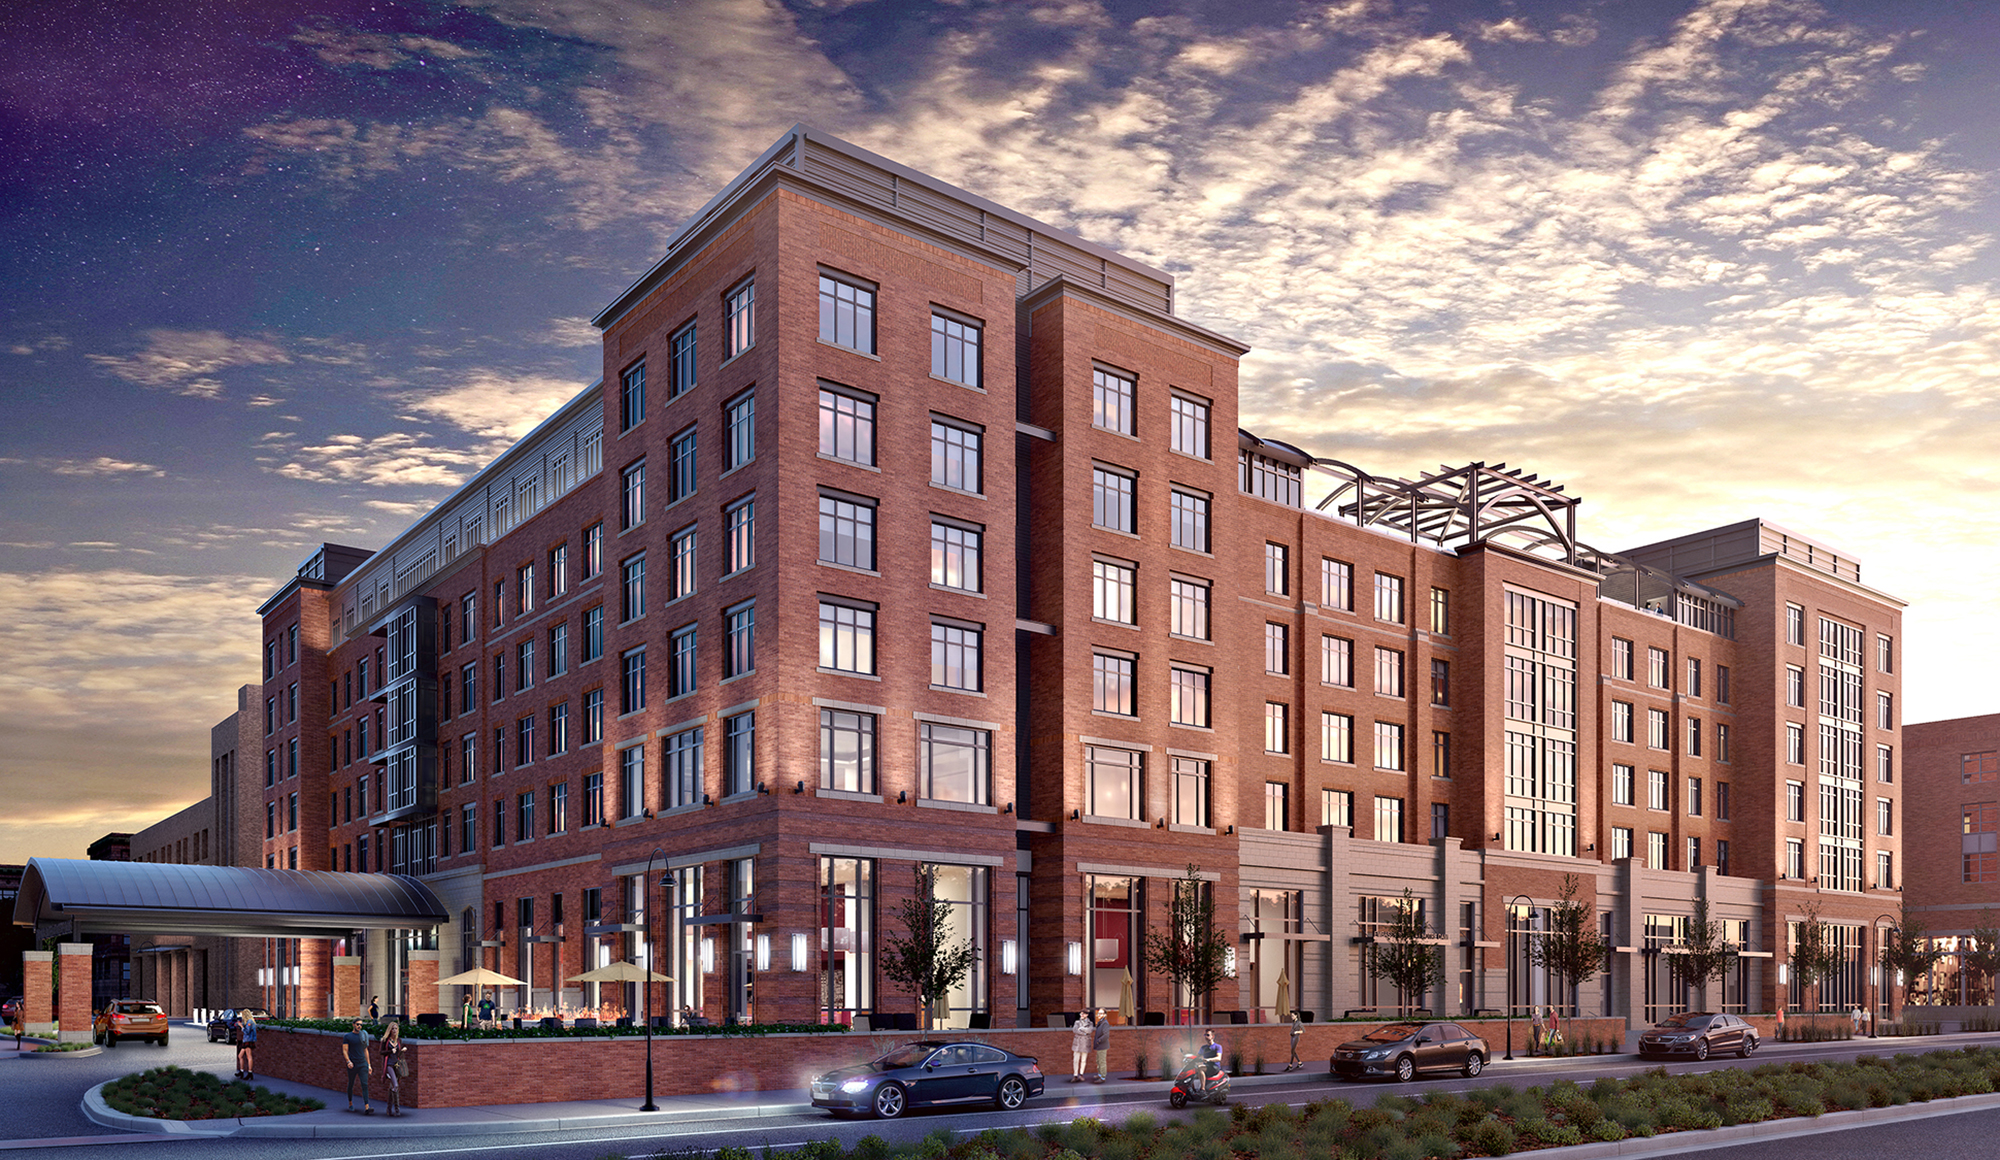  Embassy Suites Hotel - Opening Fall 2018 